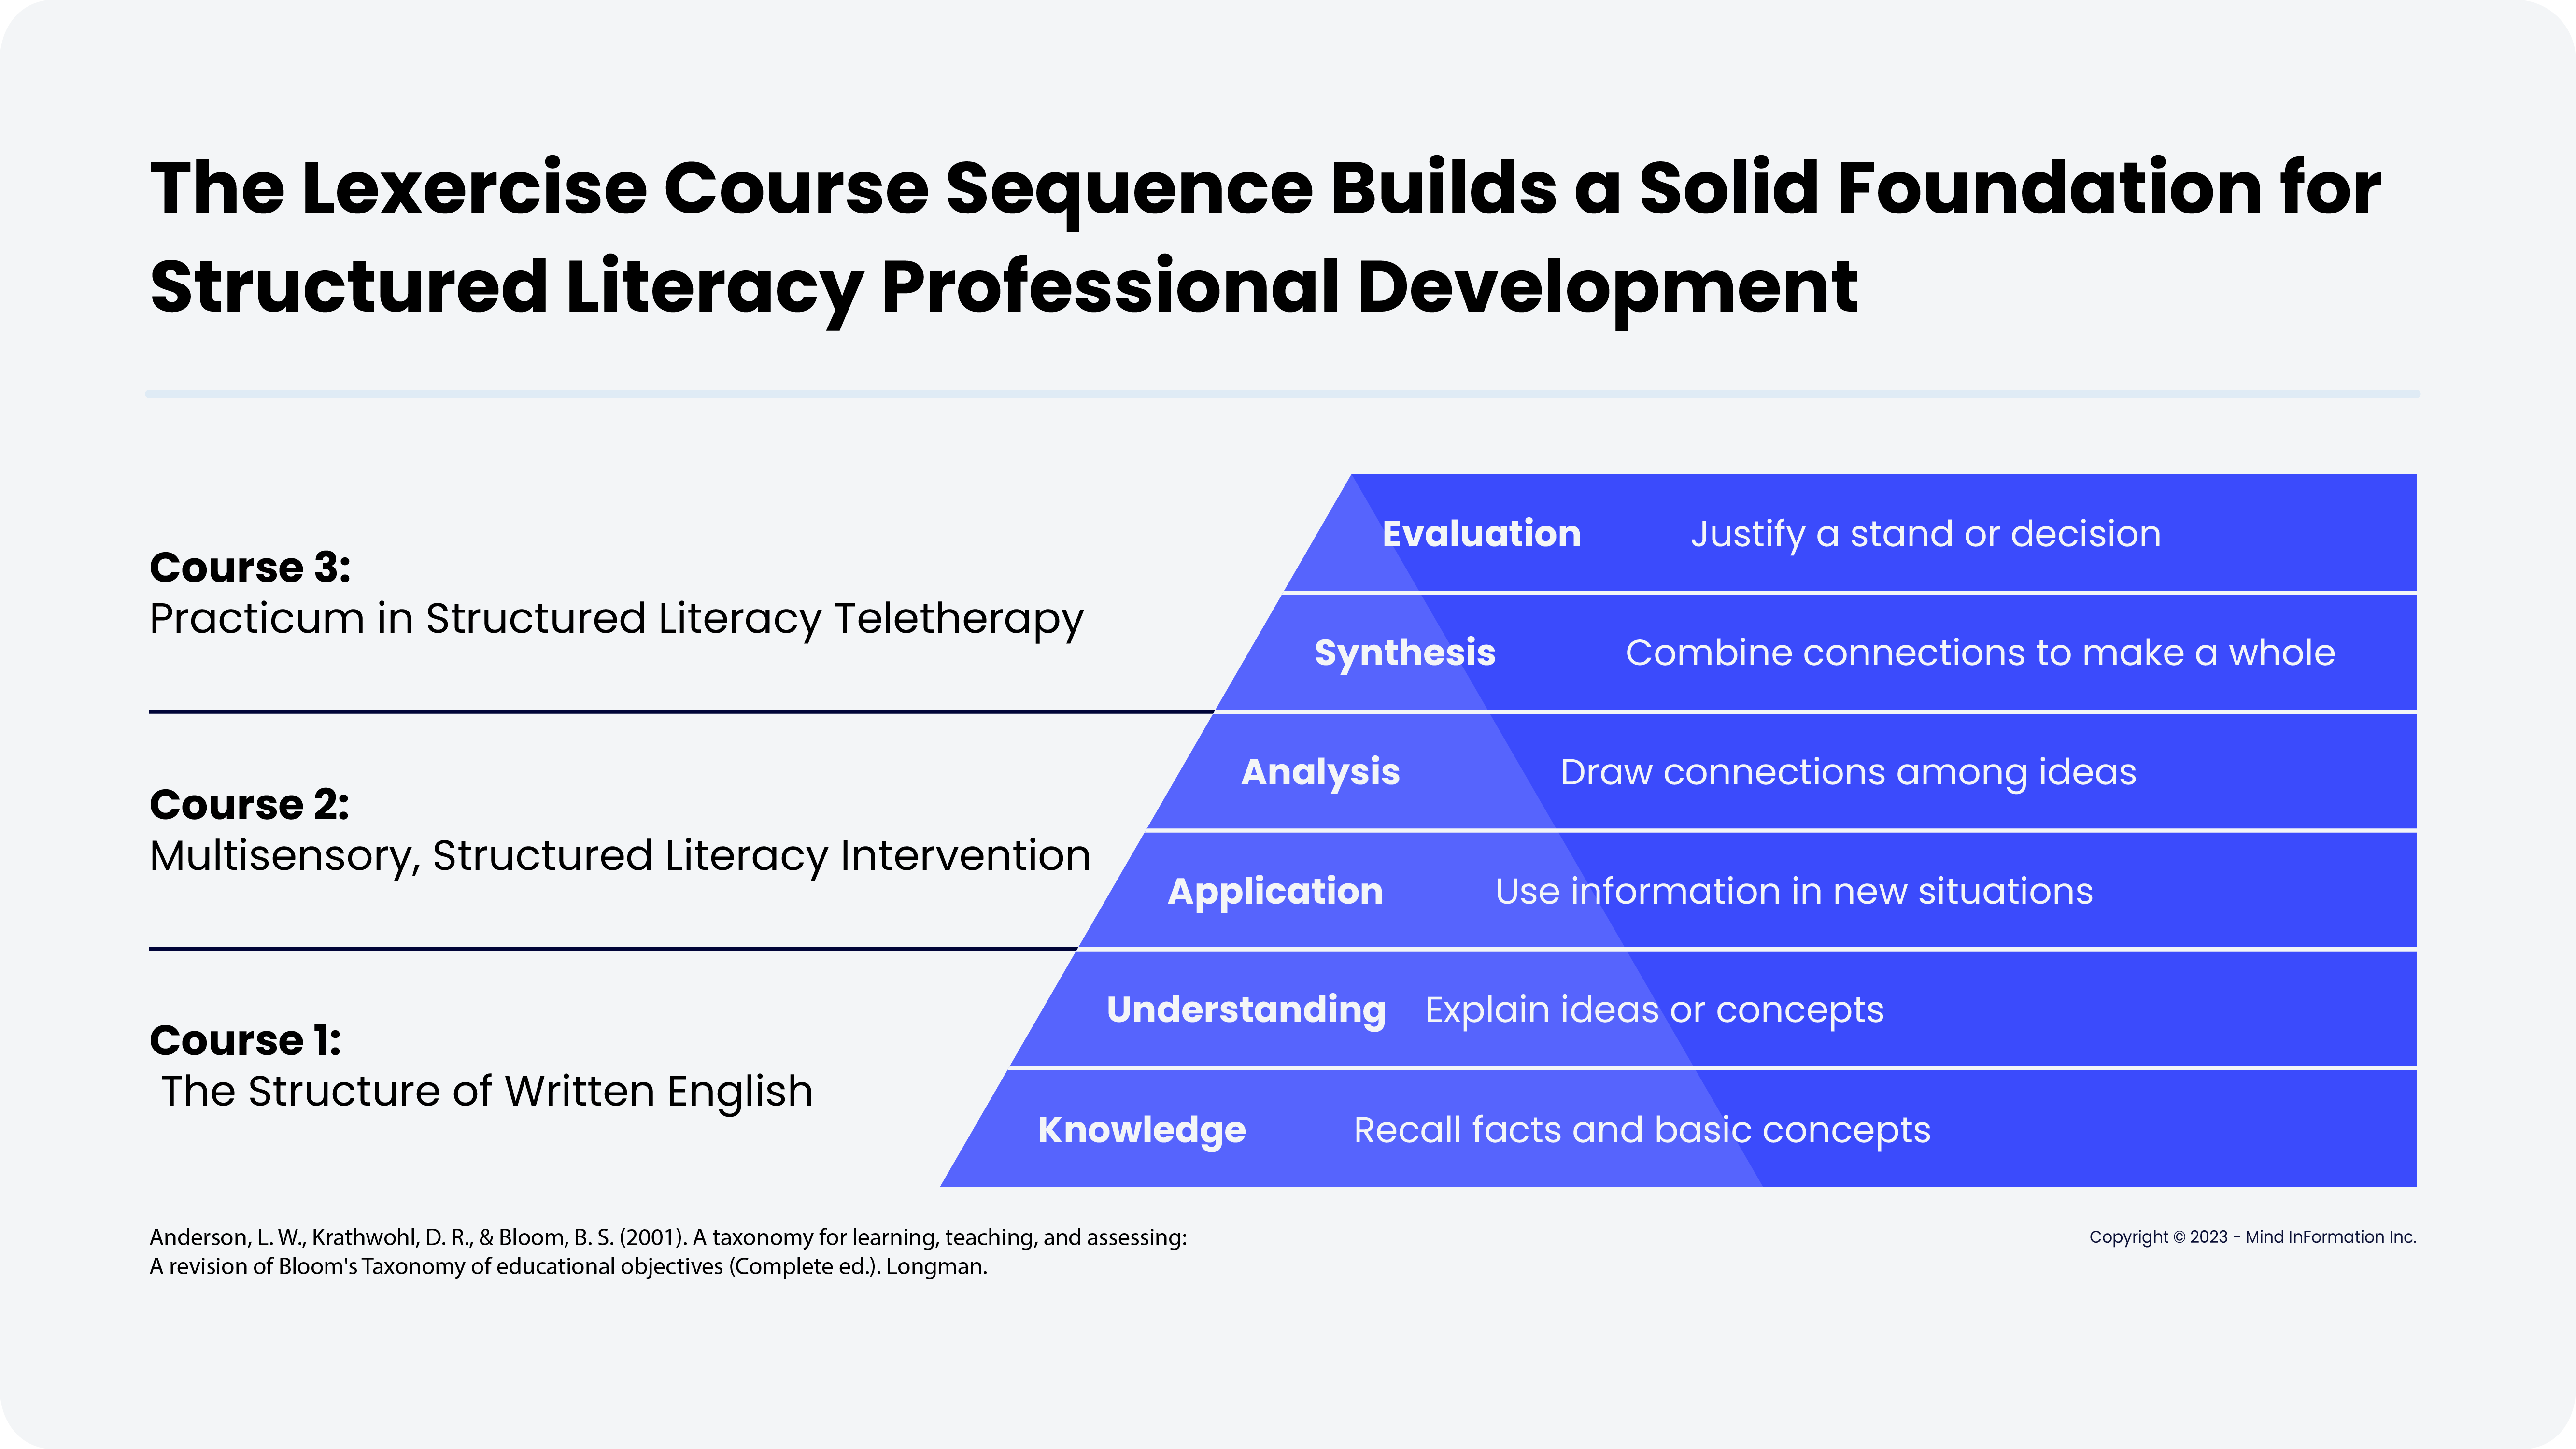 The Lexercise Course Sequence builds a solid foundation for Structured Literacy Professional Development.